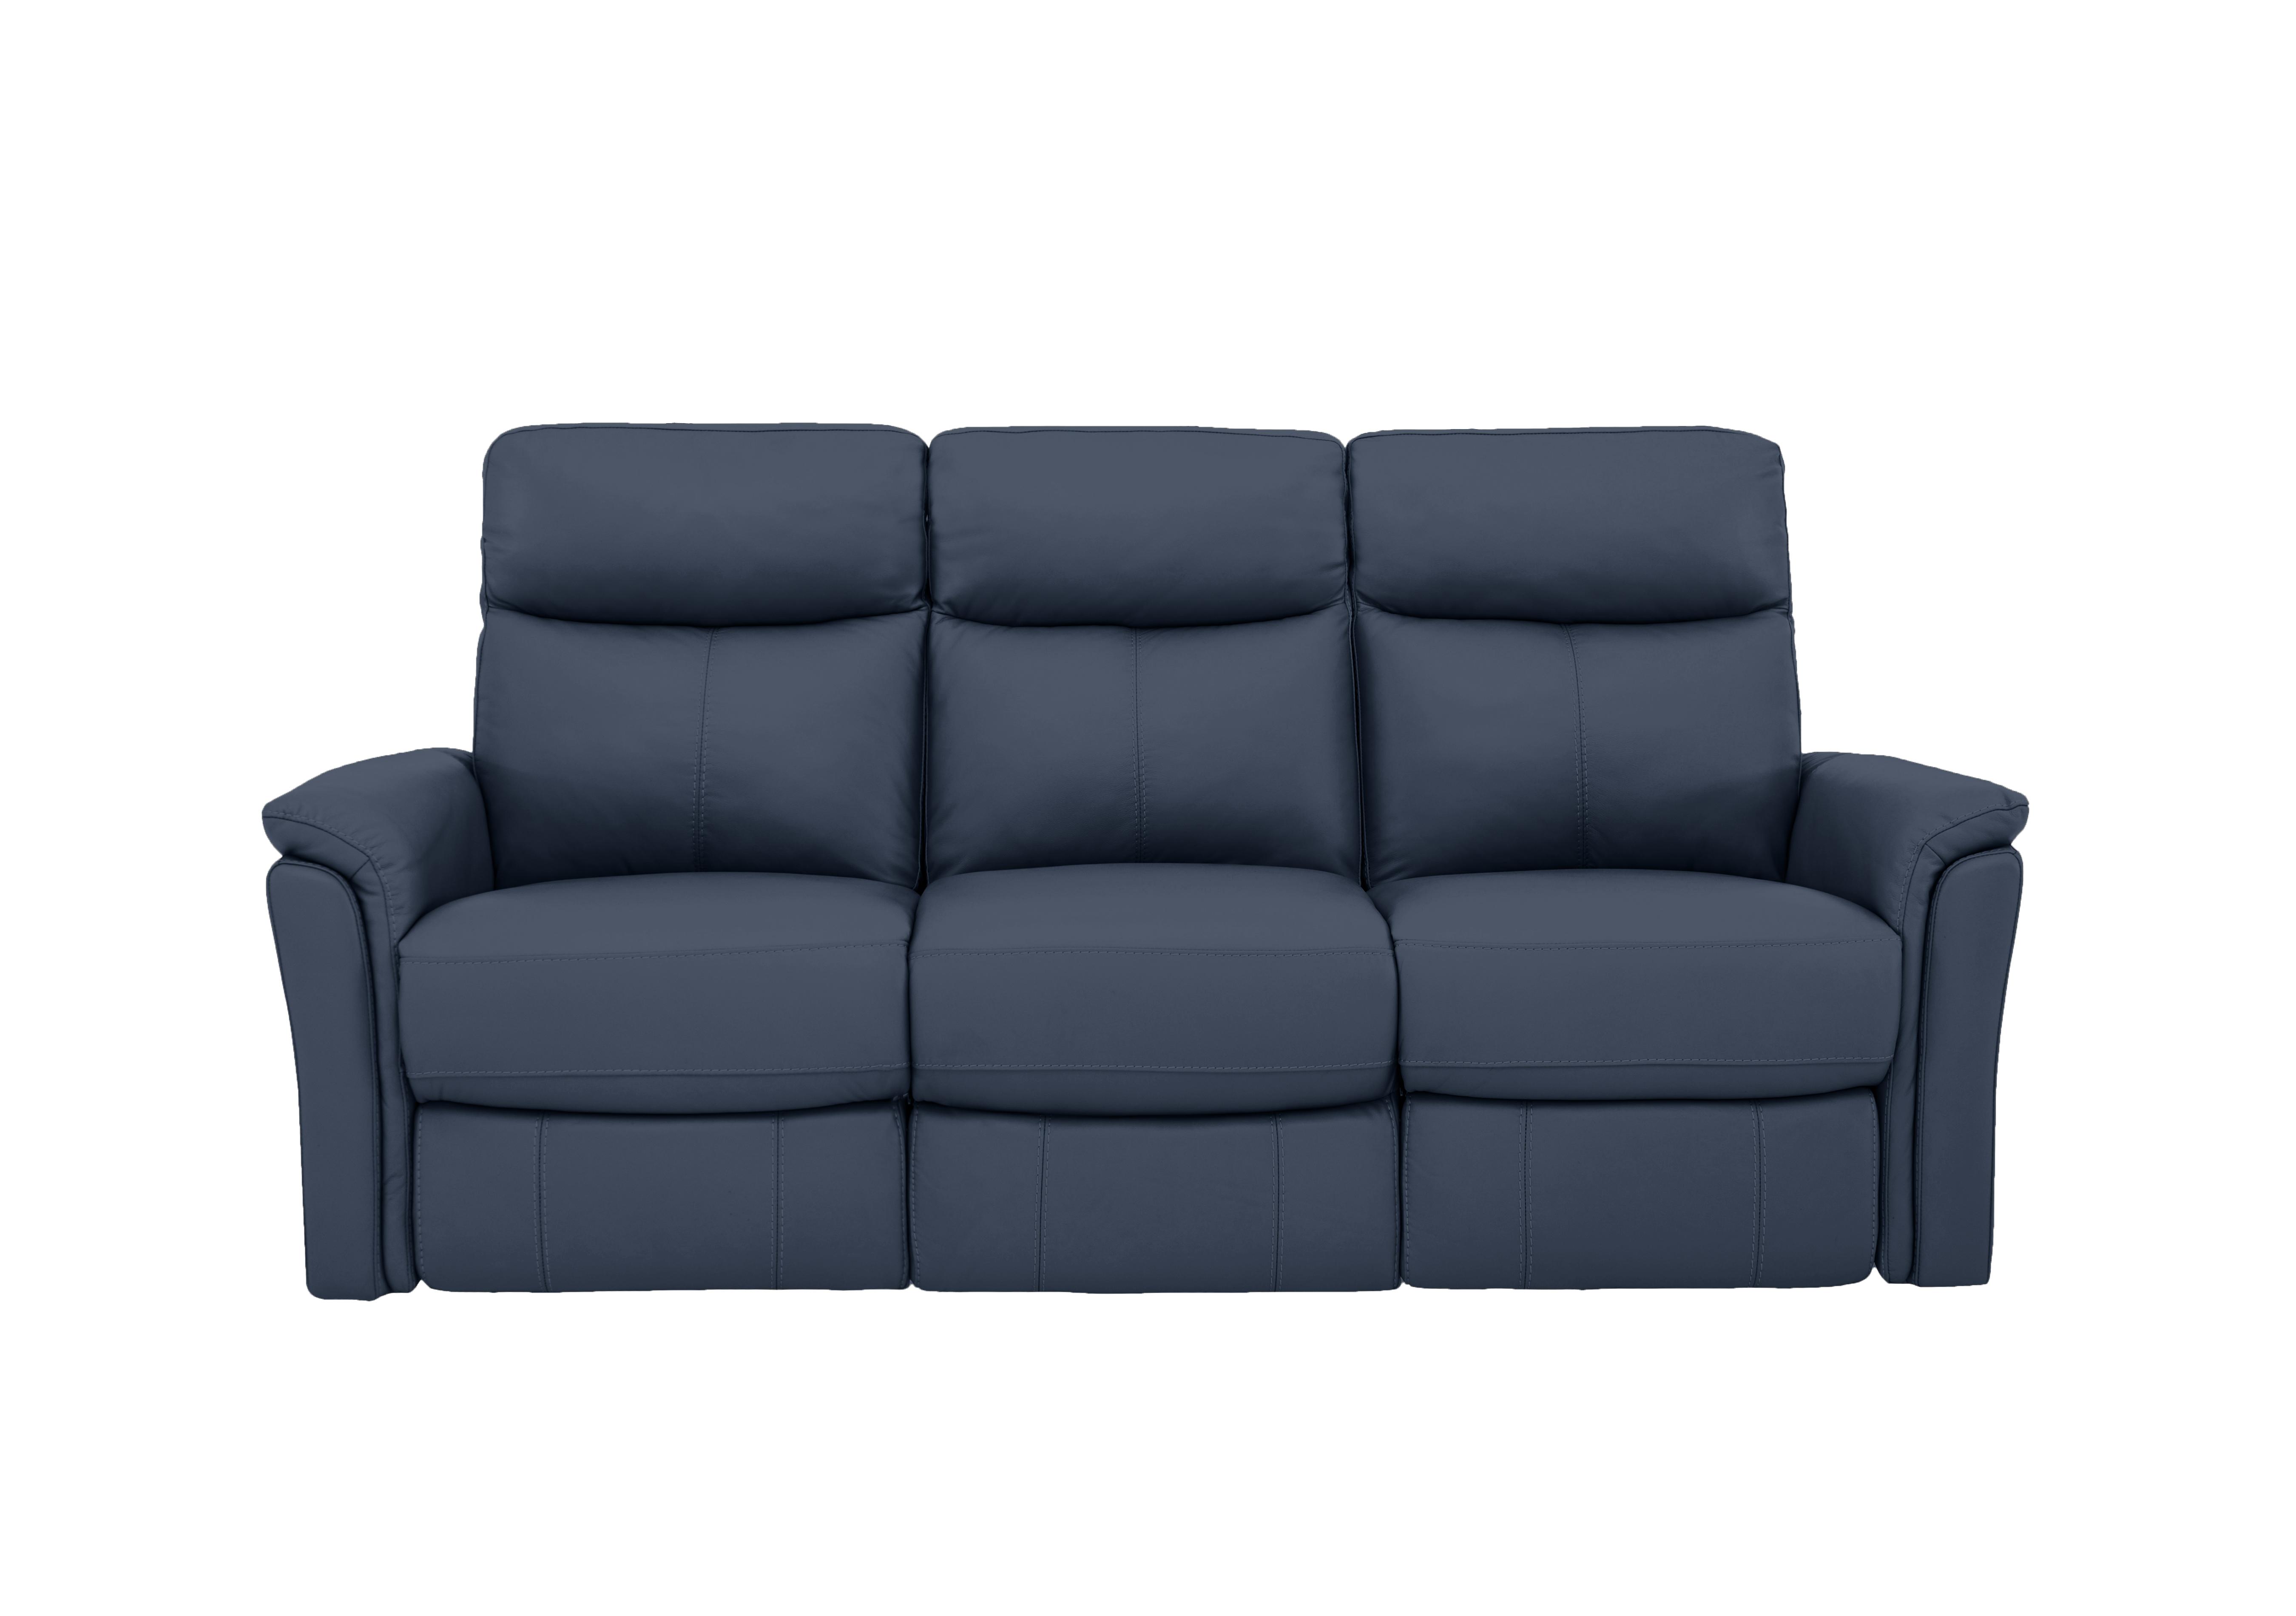 Compact Collection Piccolo 3 Seater Sofa in Bv-313e Ocean Blue on Furniture Village